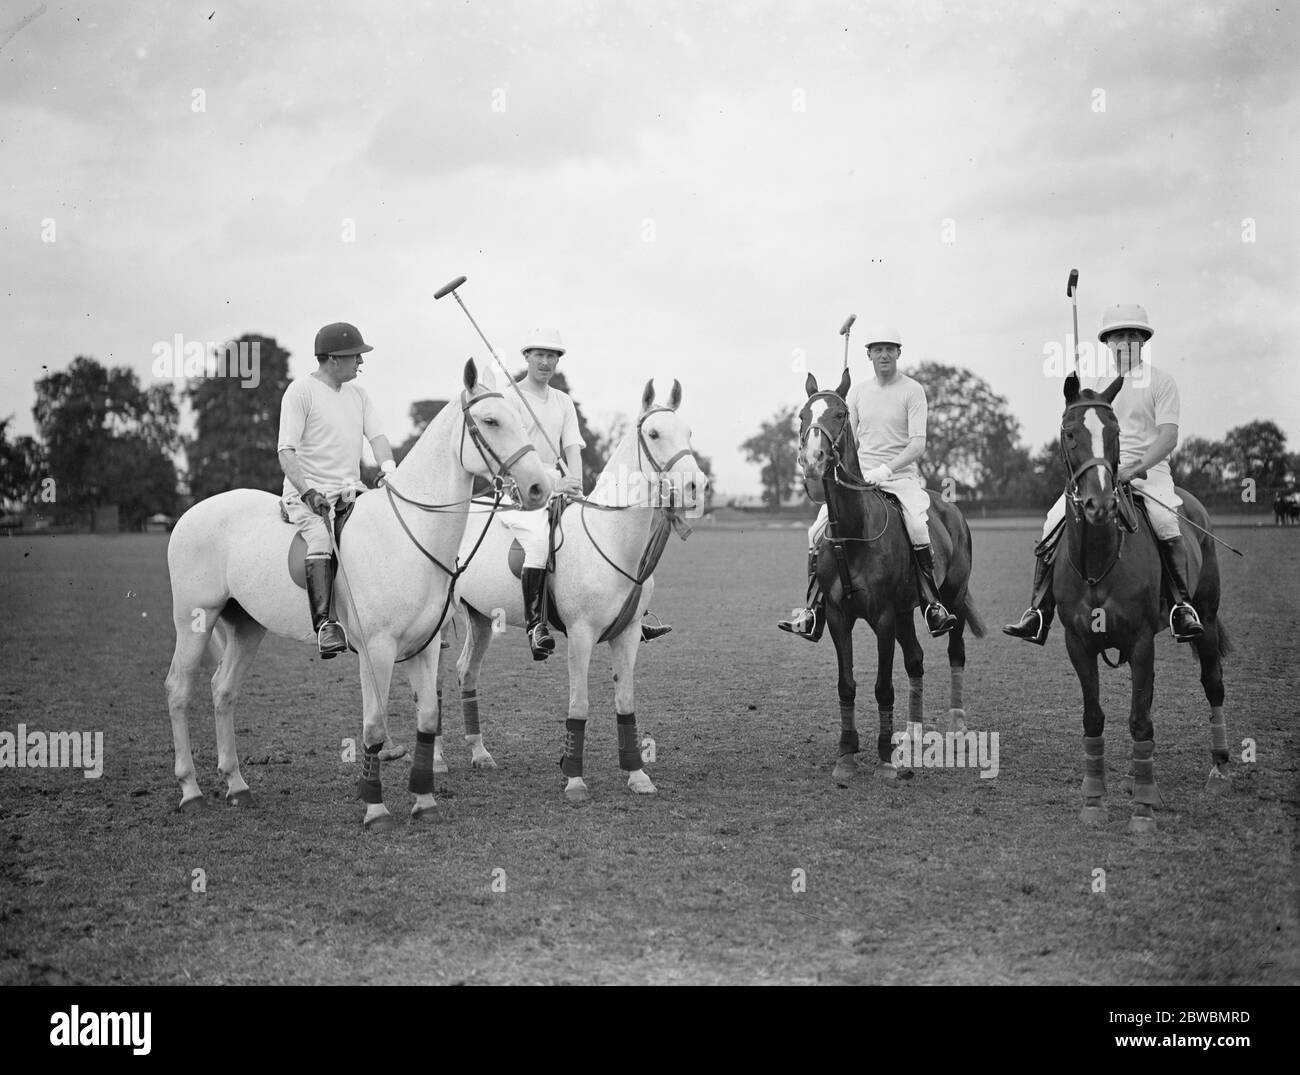 Polo beaufort Black and White Stock Photos & Images - Alamy